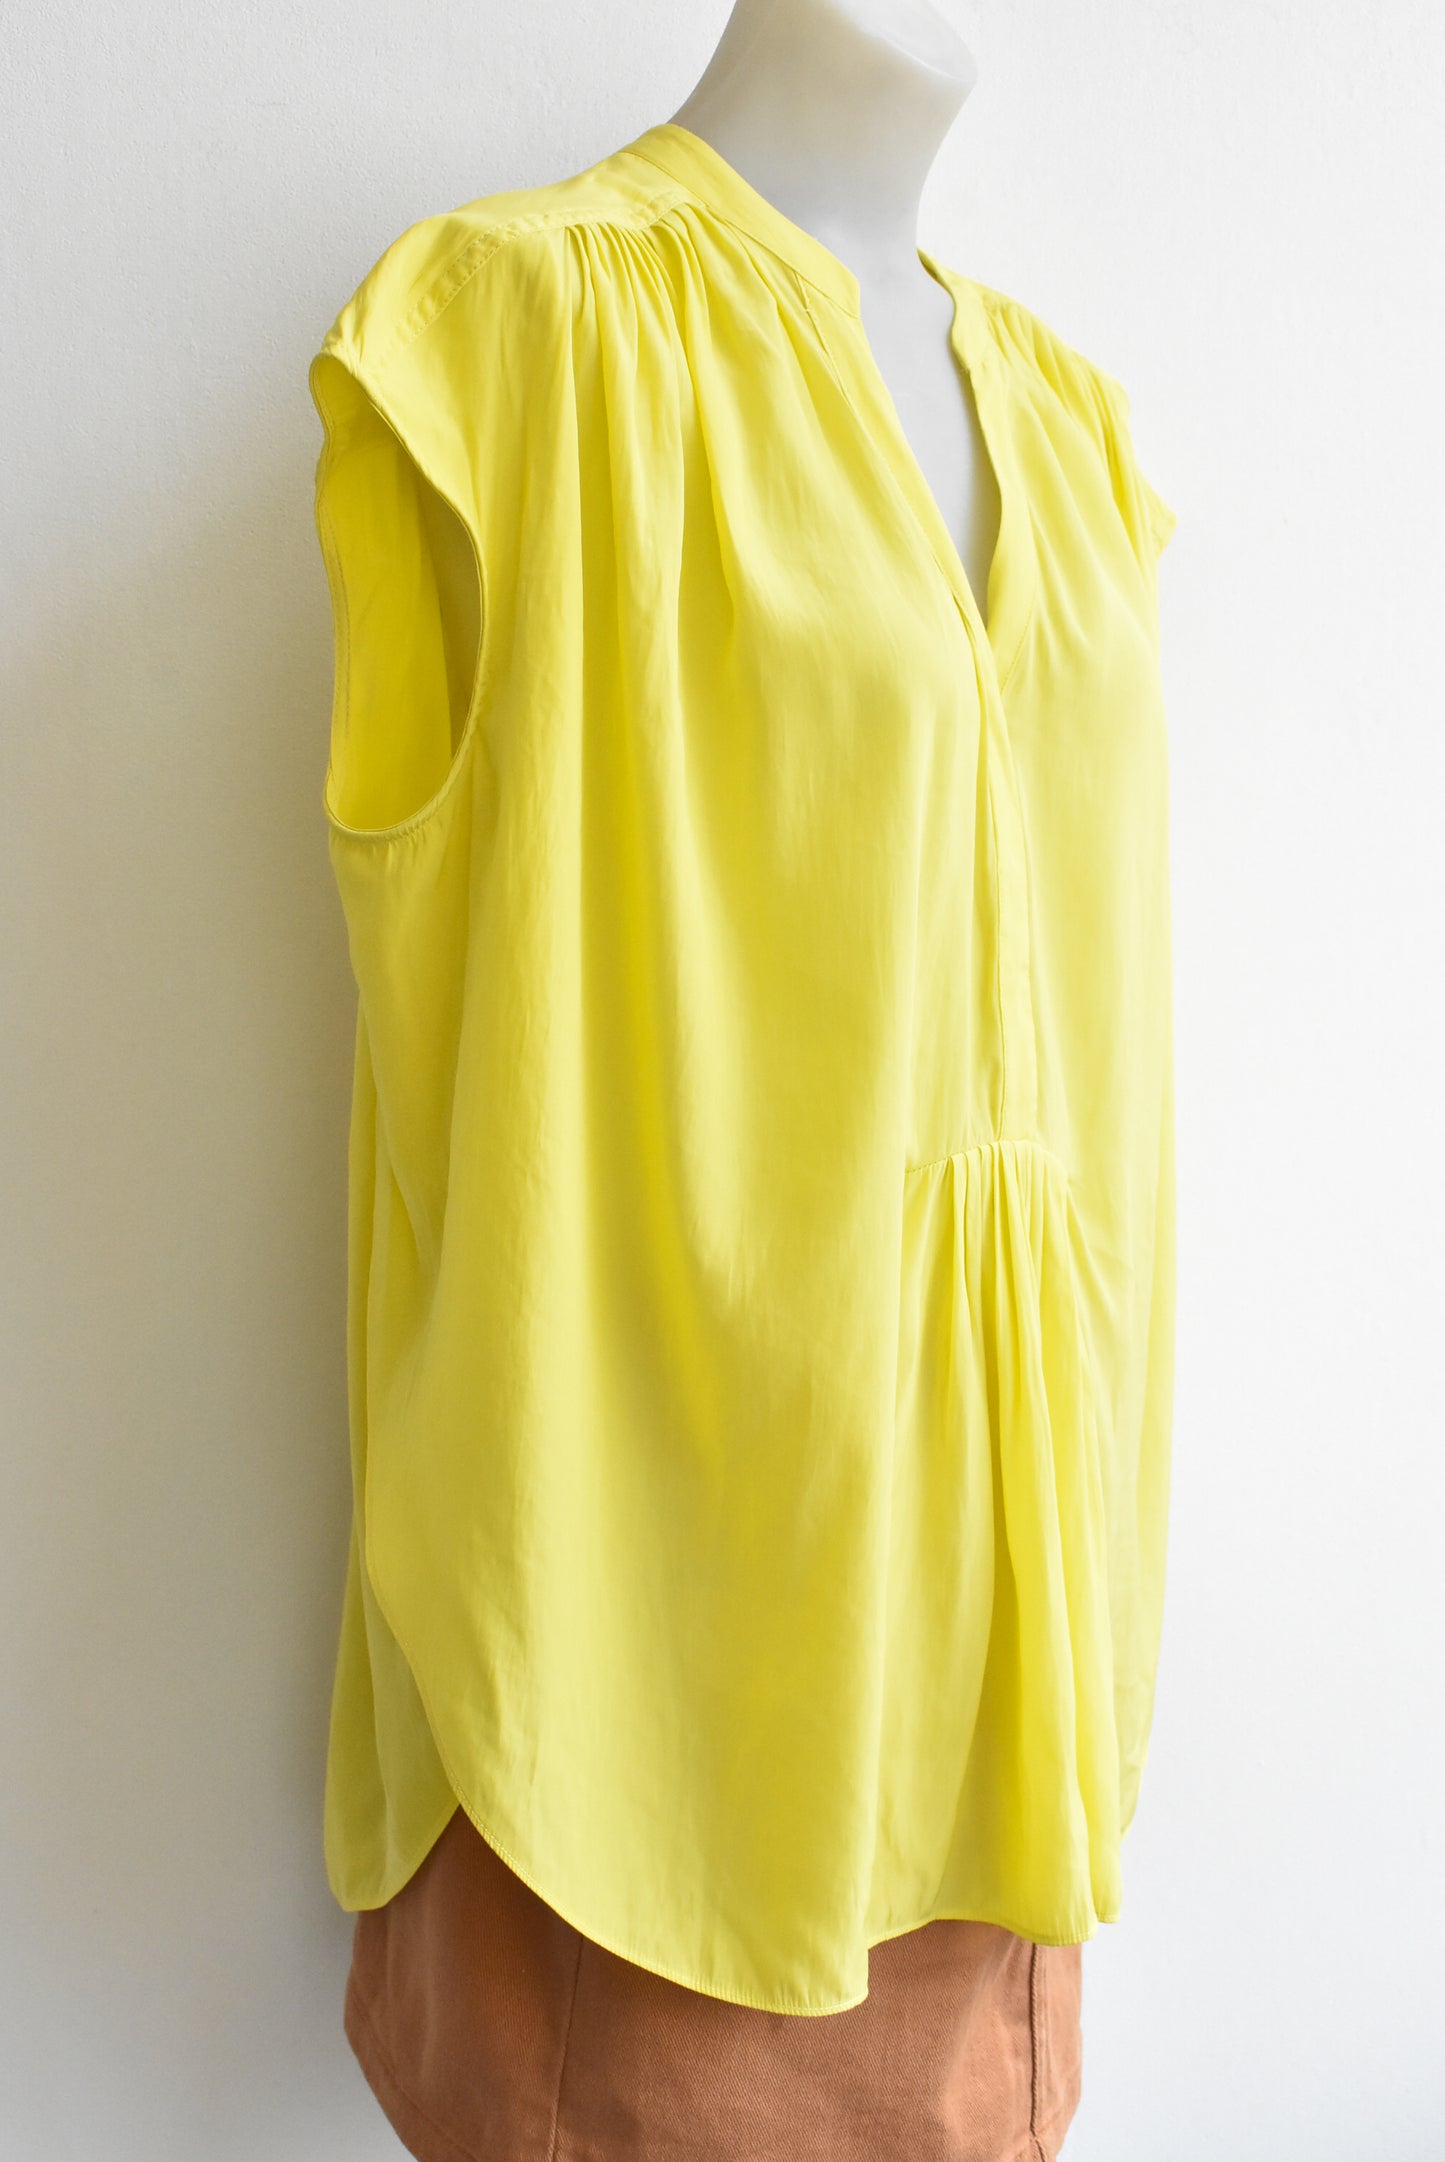 Country Road yellow high-low yellow top, M